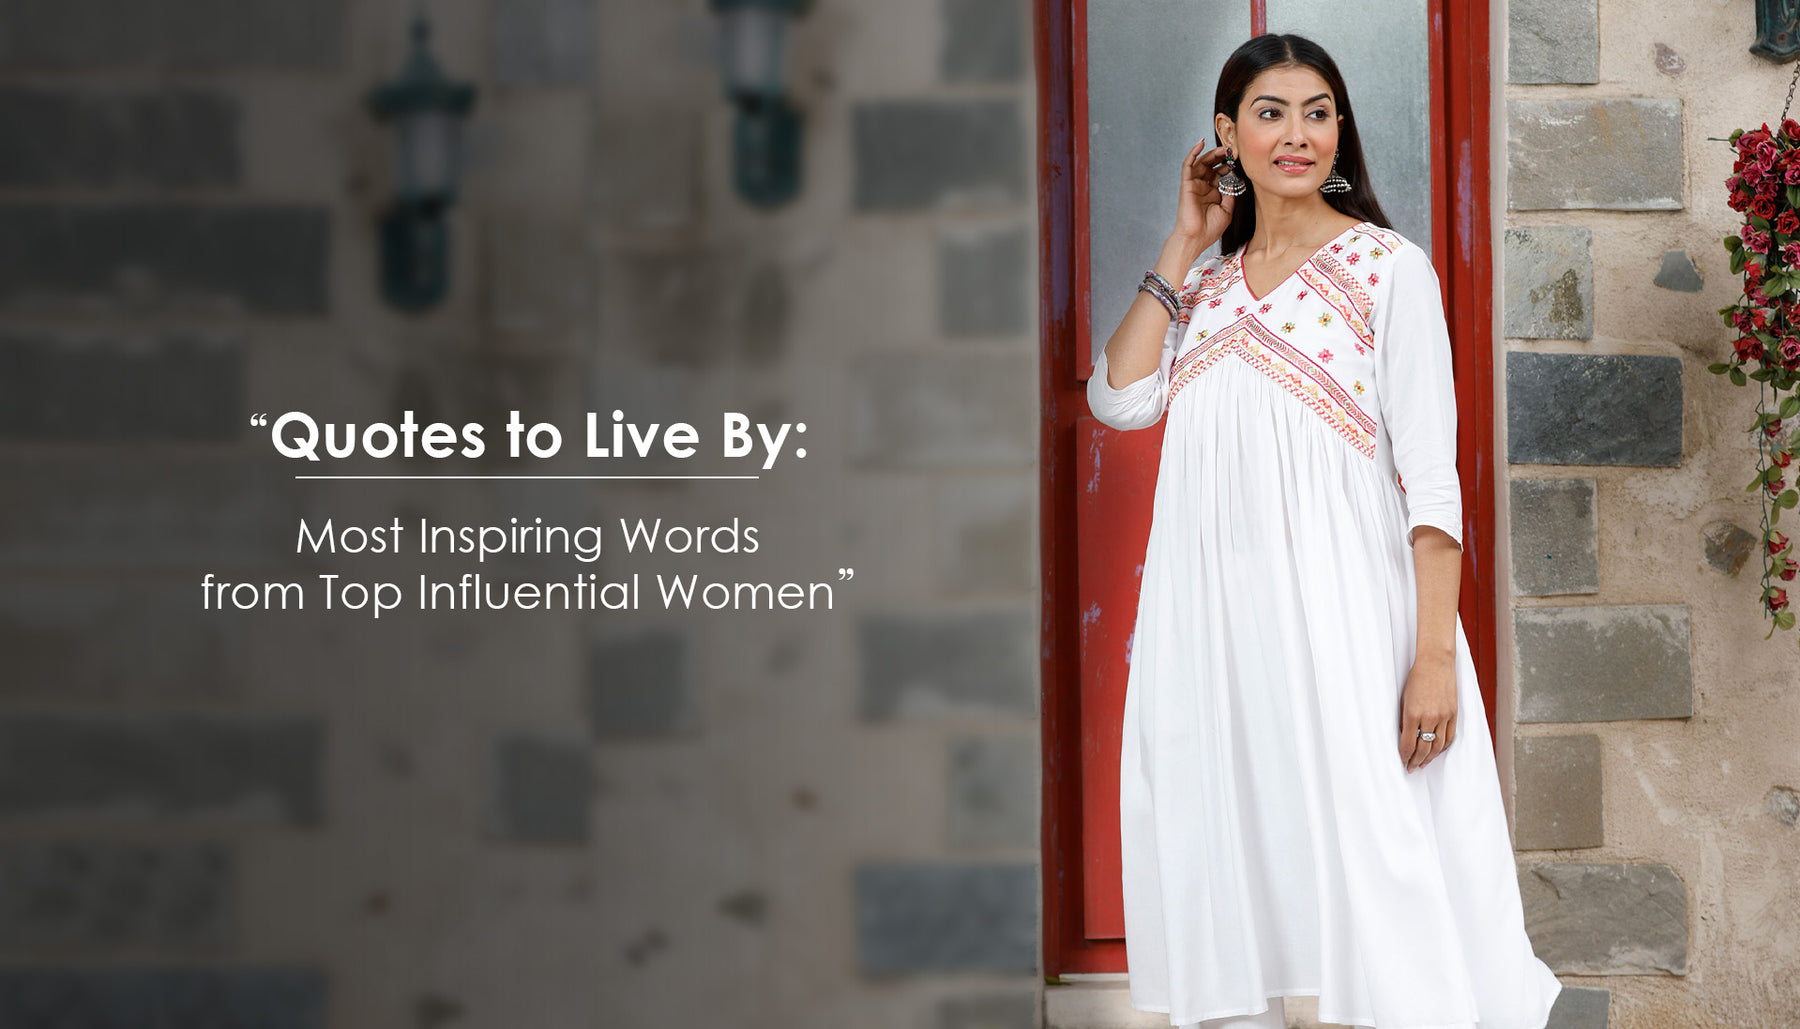 The Most Inspiring Words From Top Influential Women